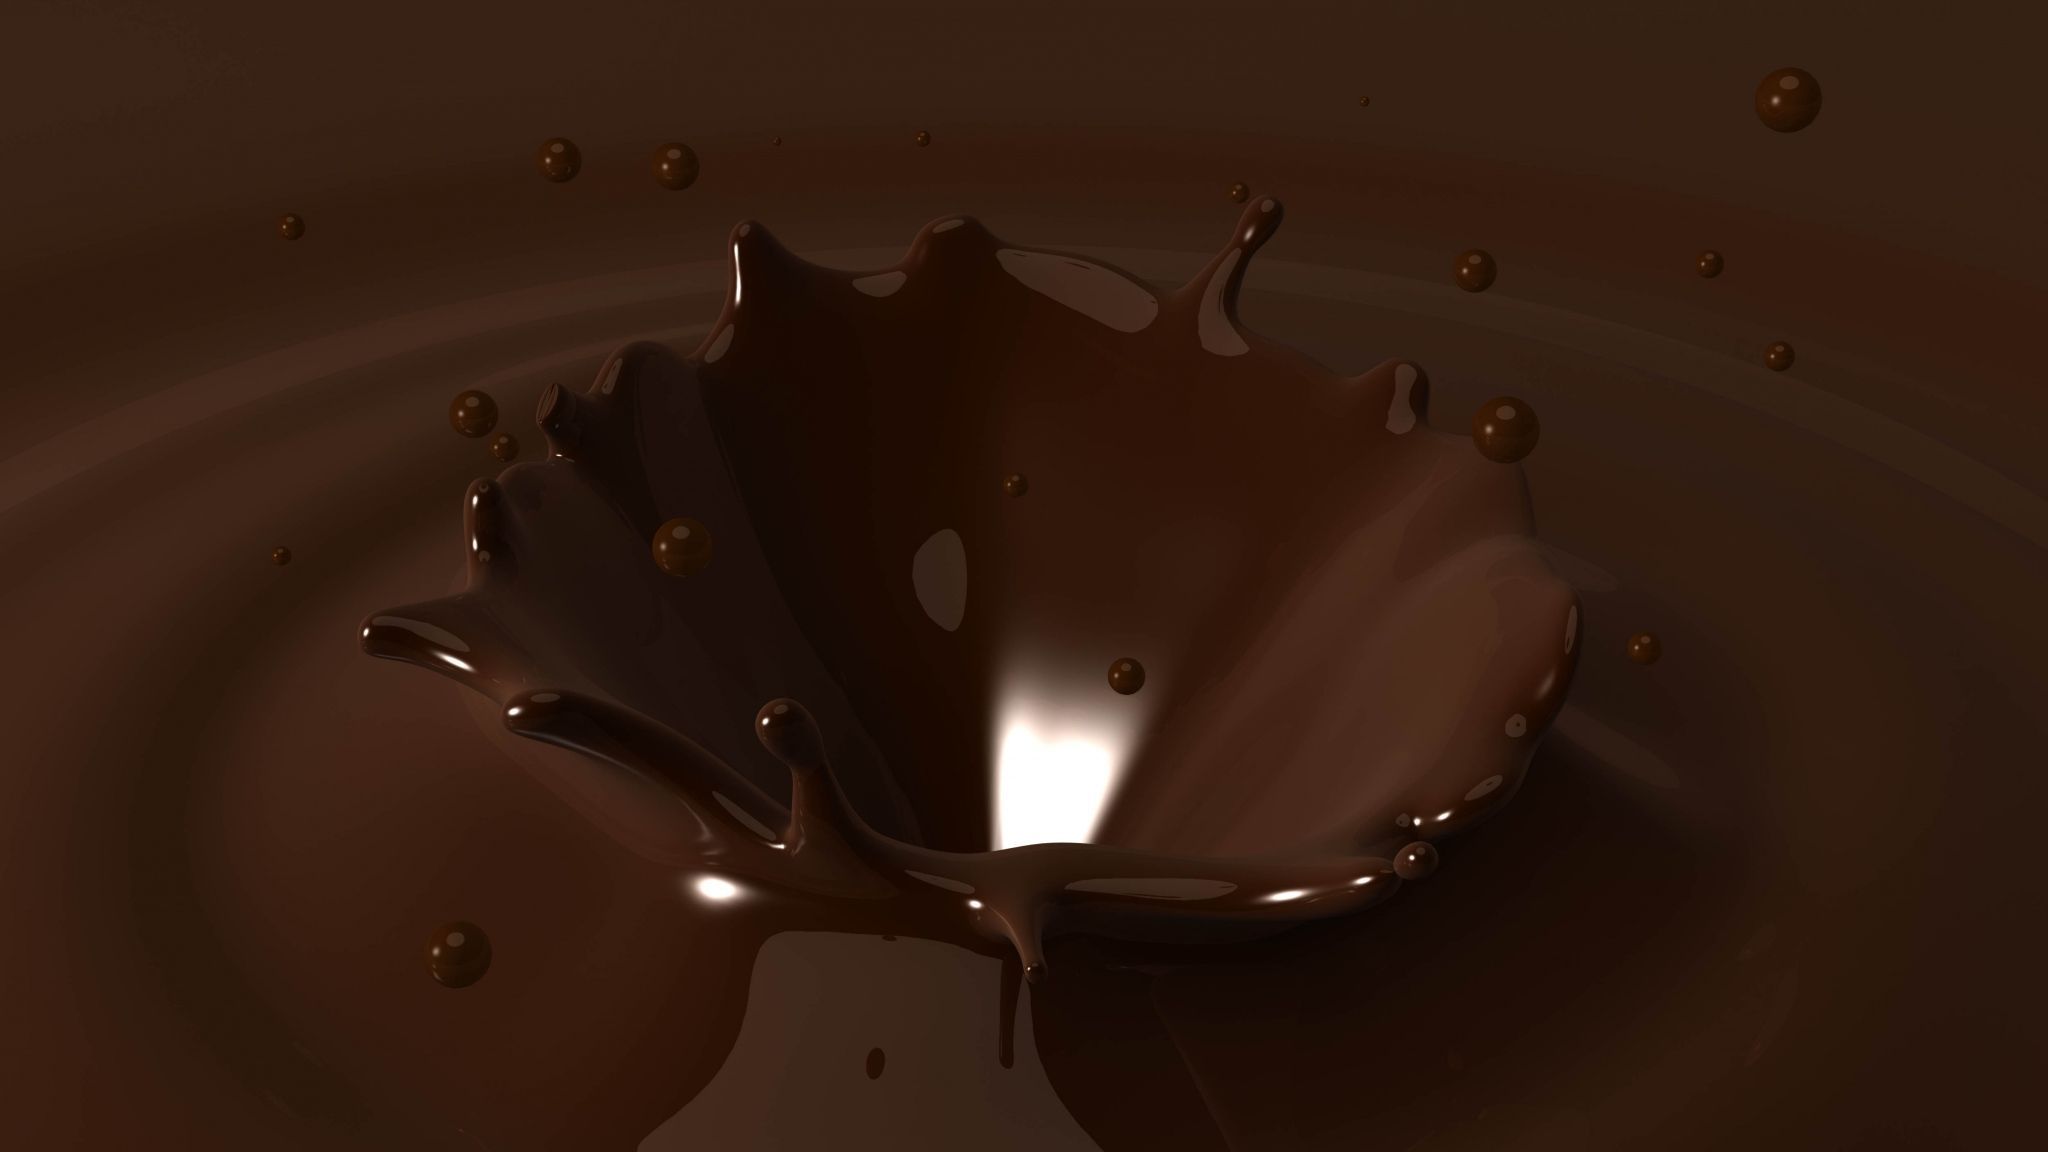 Download Wallpaper 2048x1152 Chocolate, Background, Drops, Sprays ...